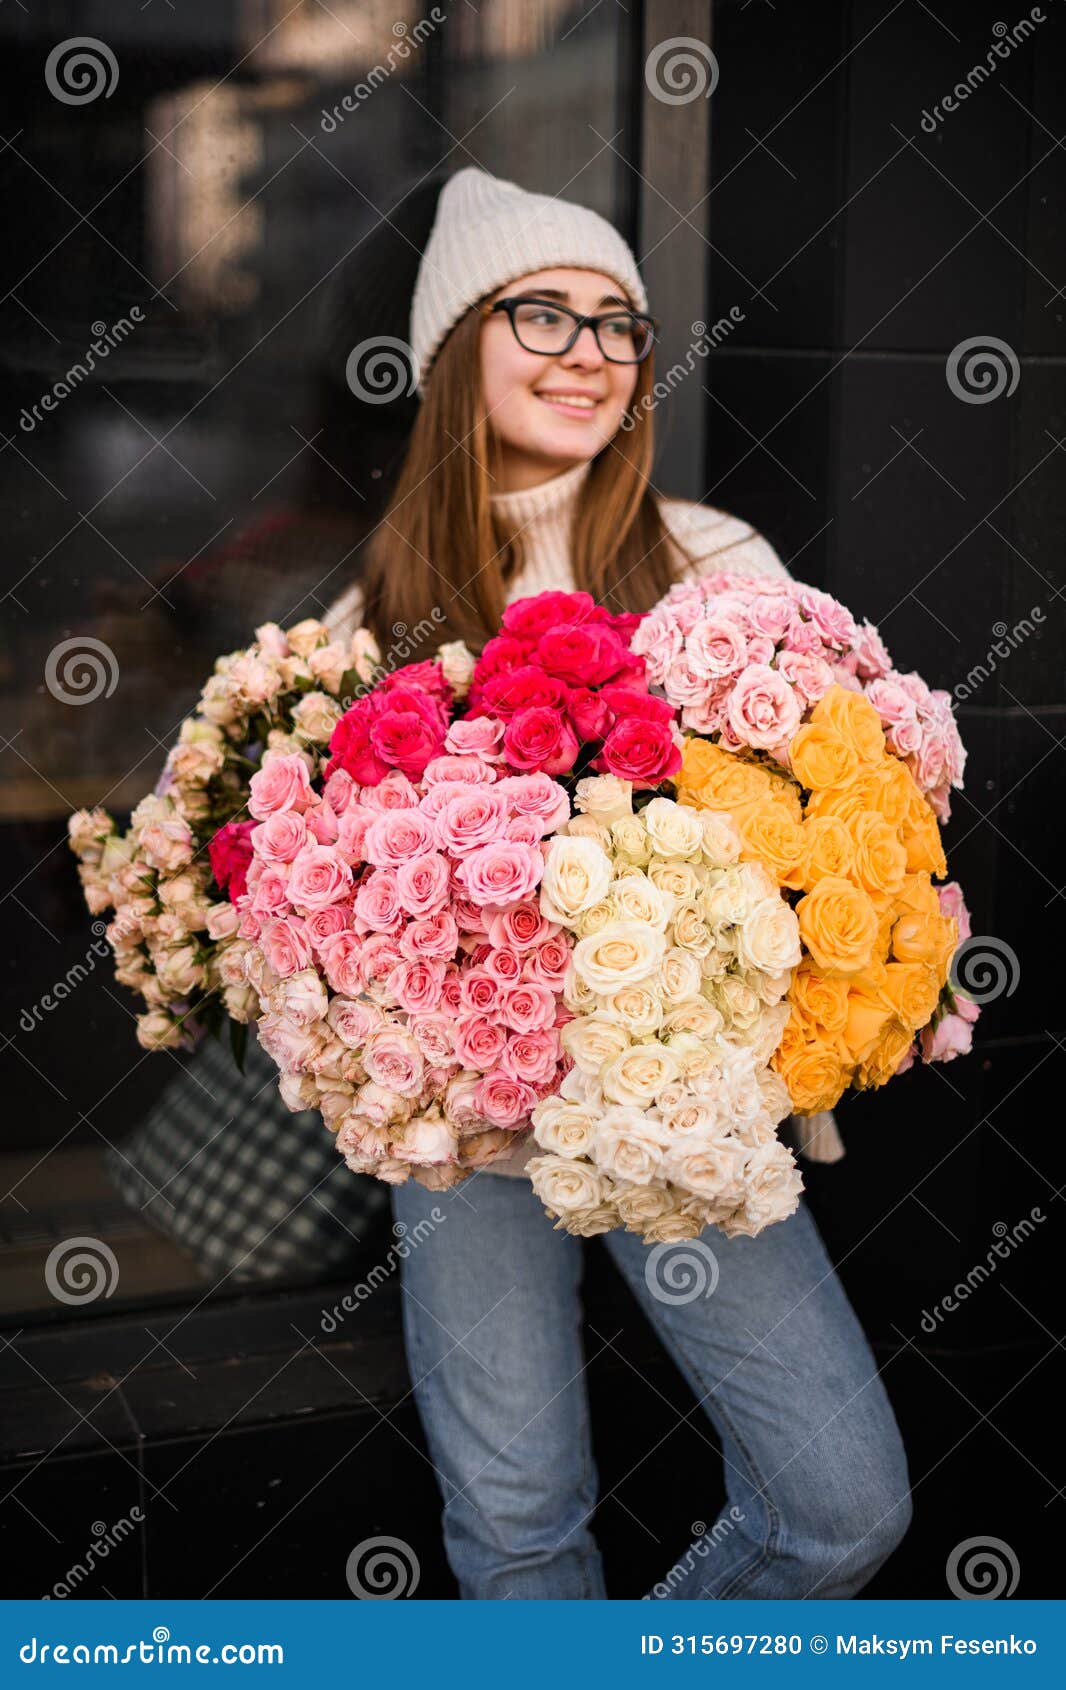 perky girl in light sweater and jeans stands with a bouquet of colorful flowers